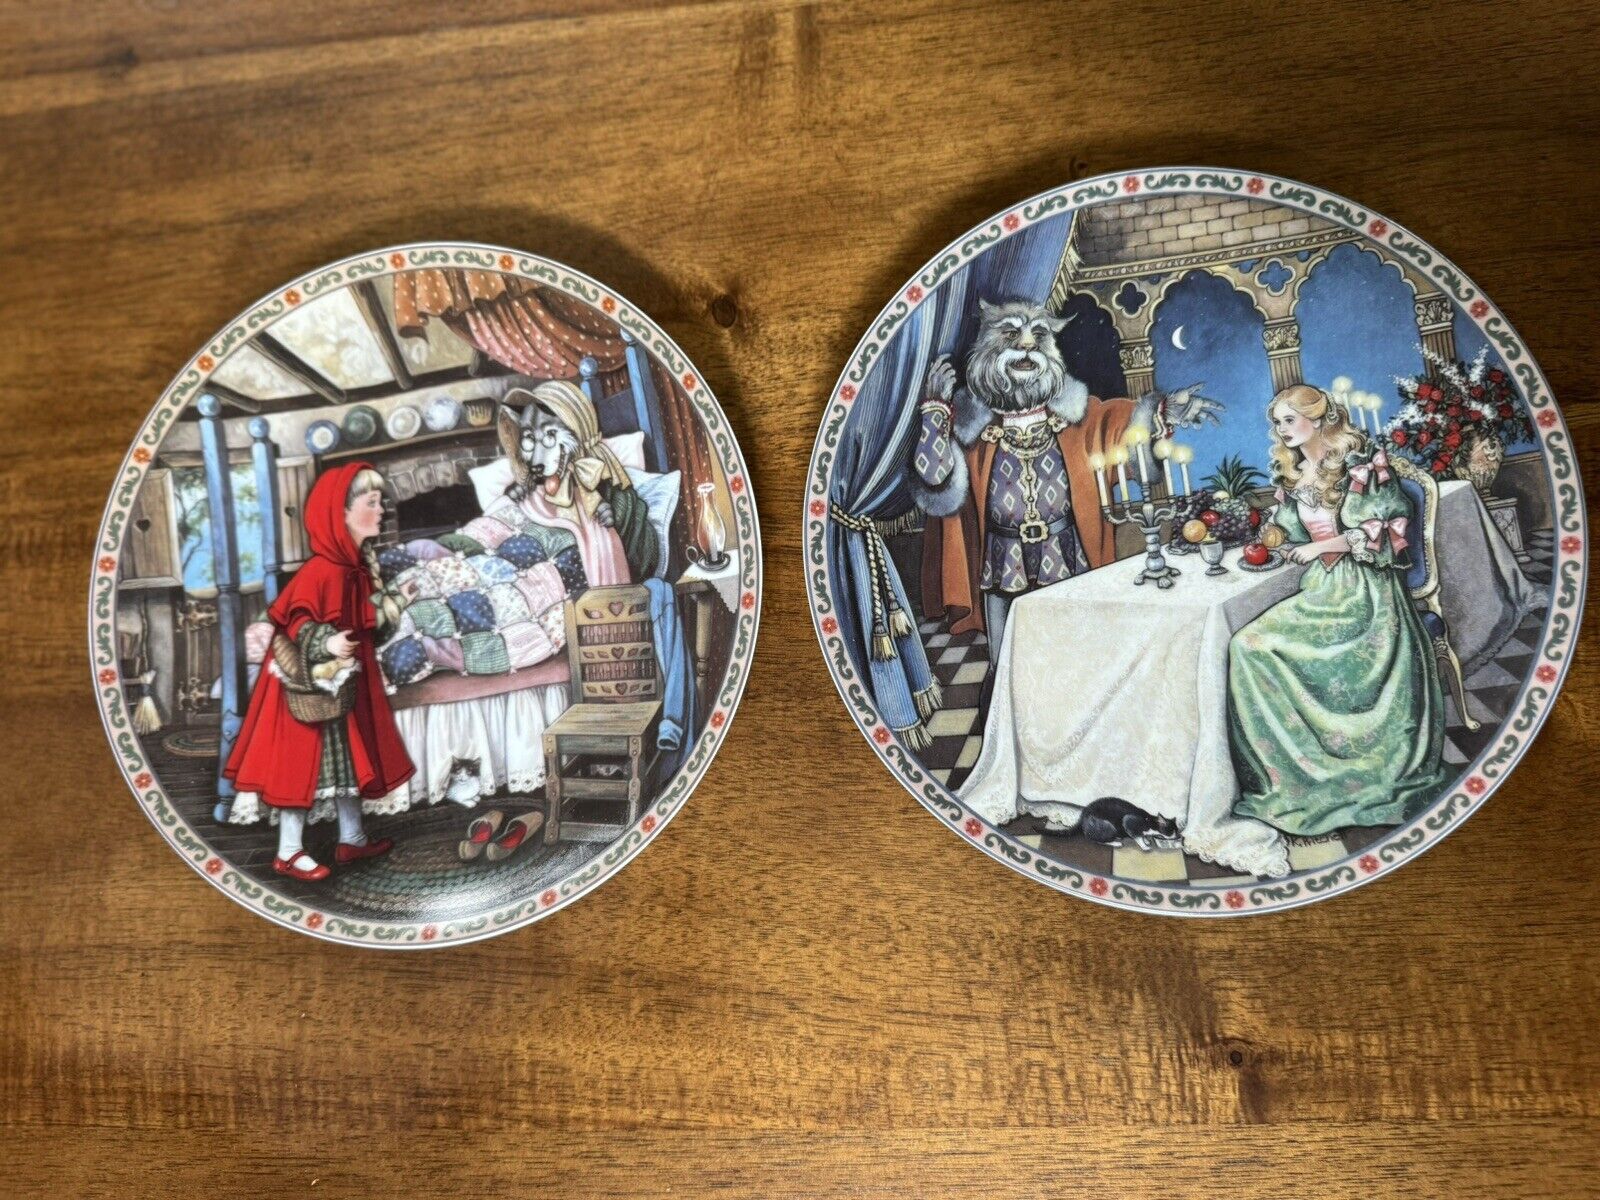 Knowles Little Red Riding Hood  & Beauty & The Beast Plates 1988-89 Limited